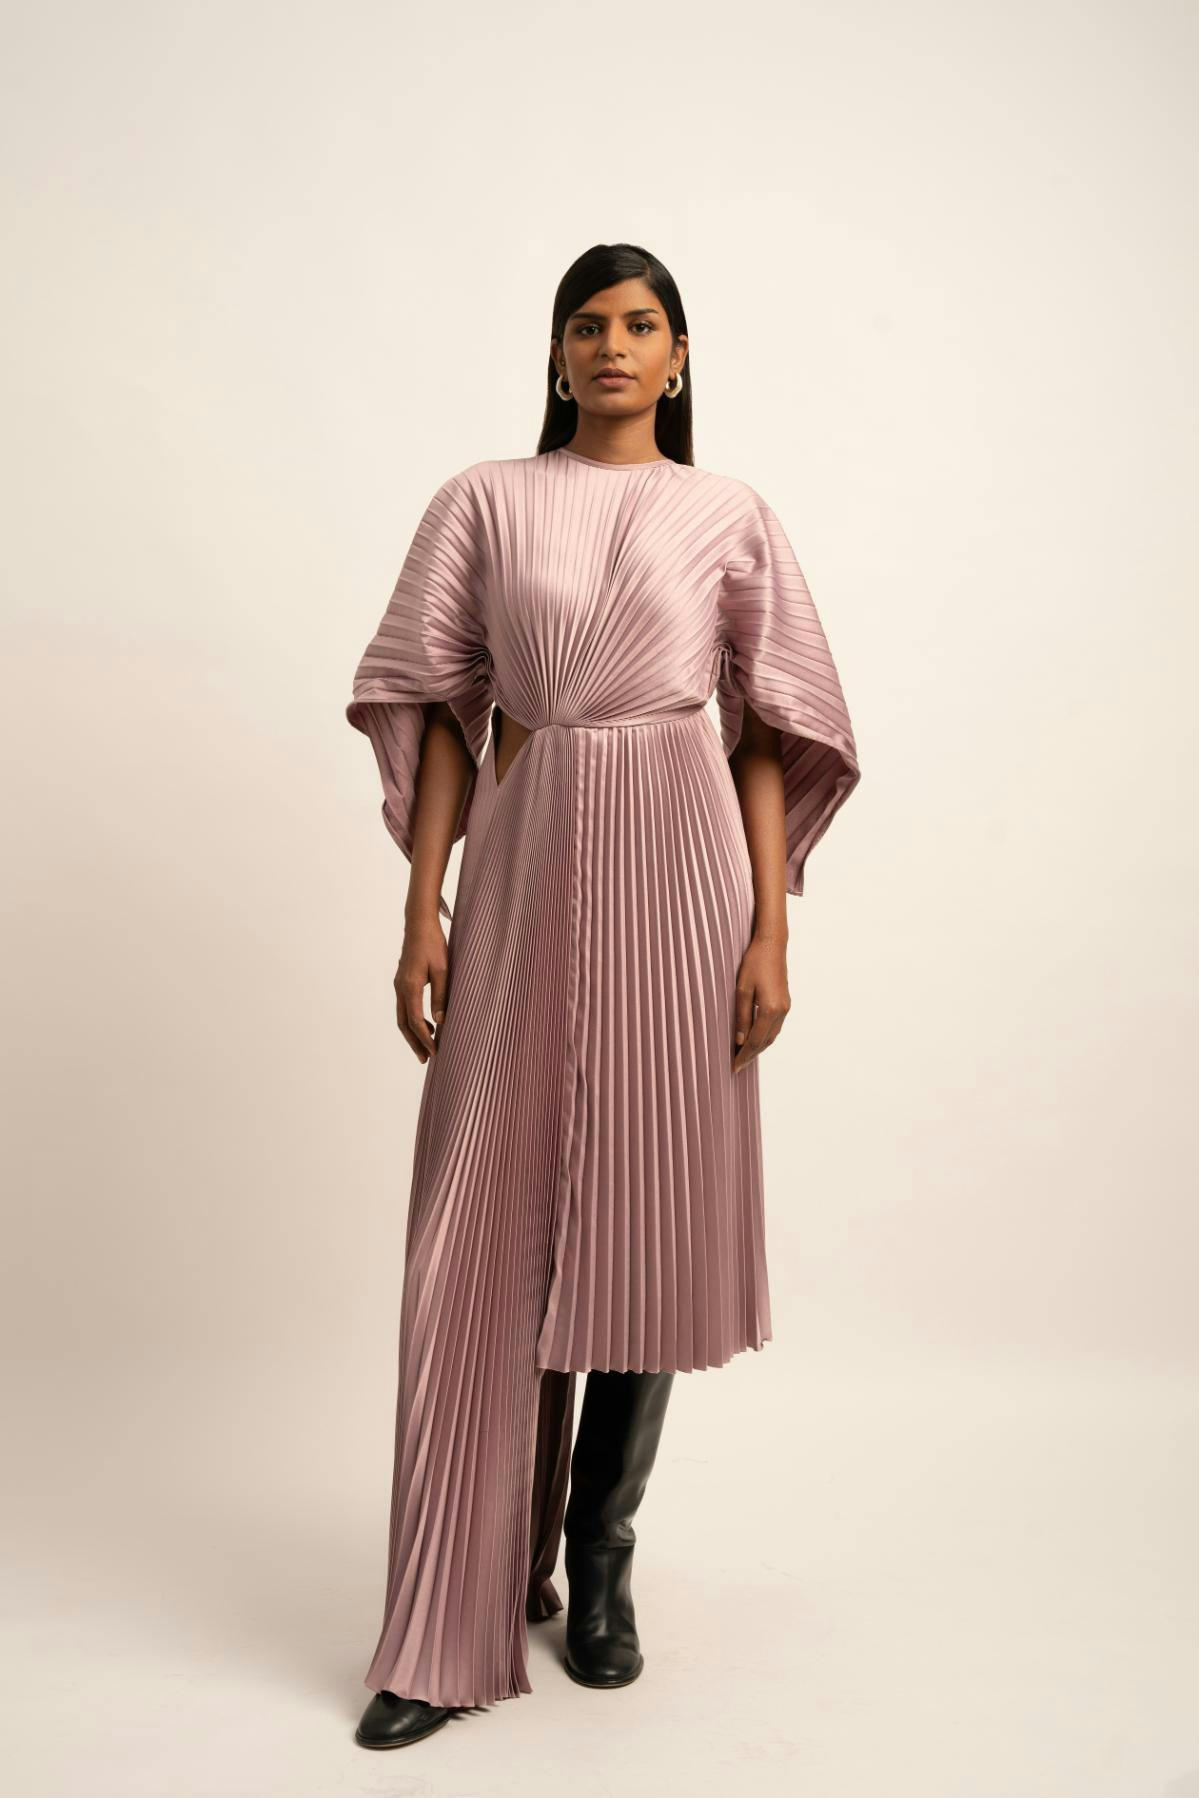 The Sculpted Harmony Pleated Dress, a product by Siddhant Agrawal Label